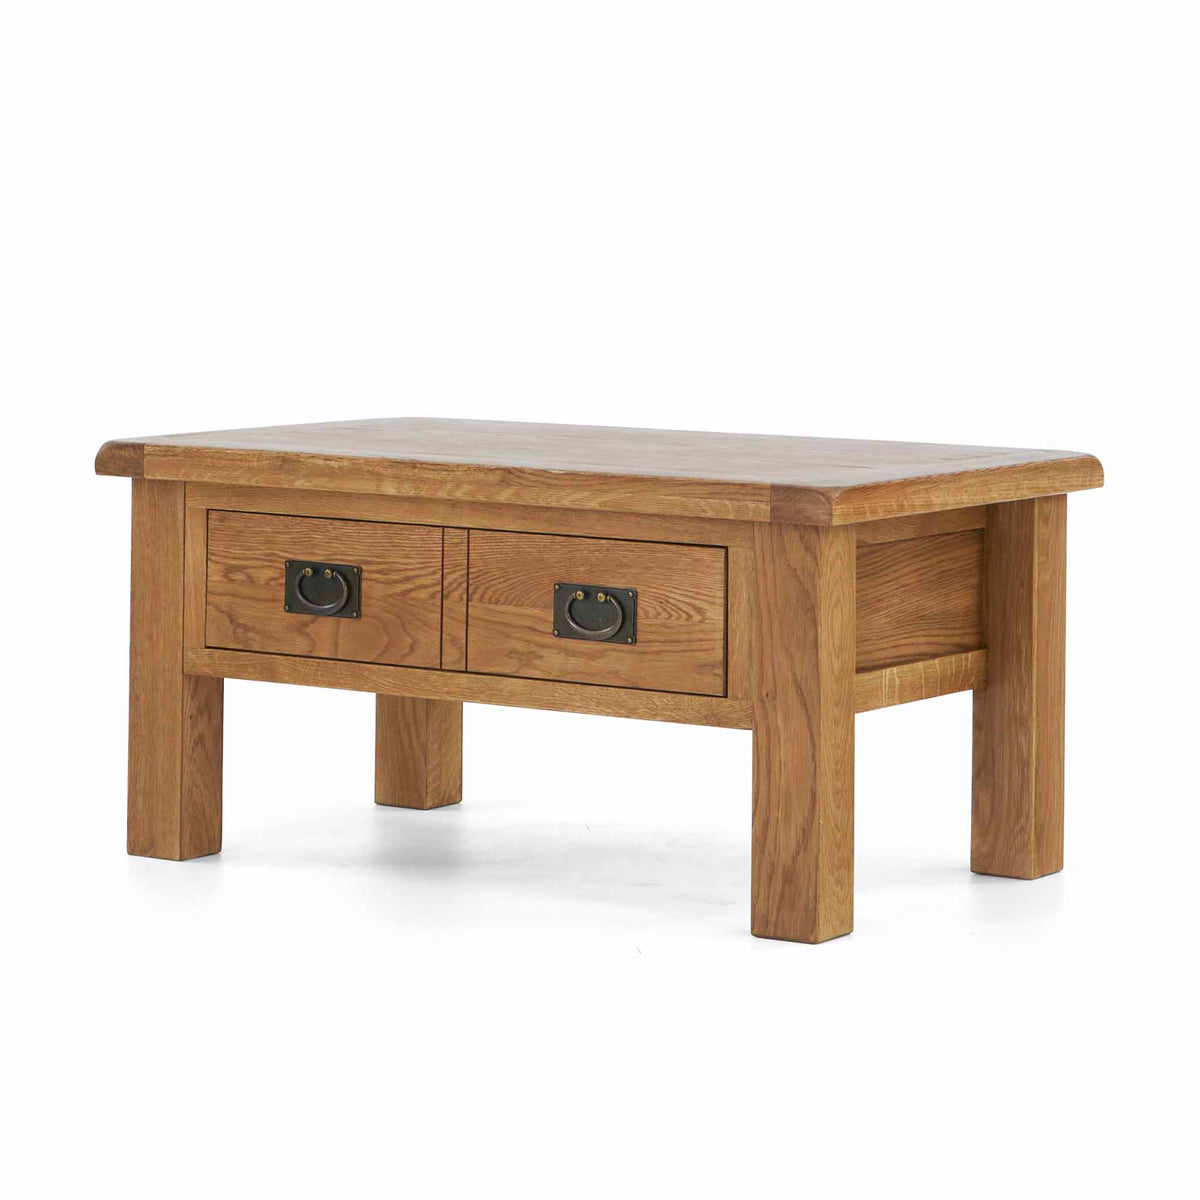 Zelah Oak Coffee Table with Drawer - Side view